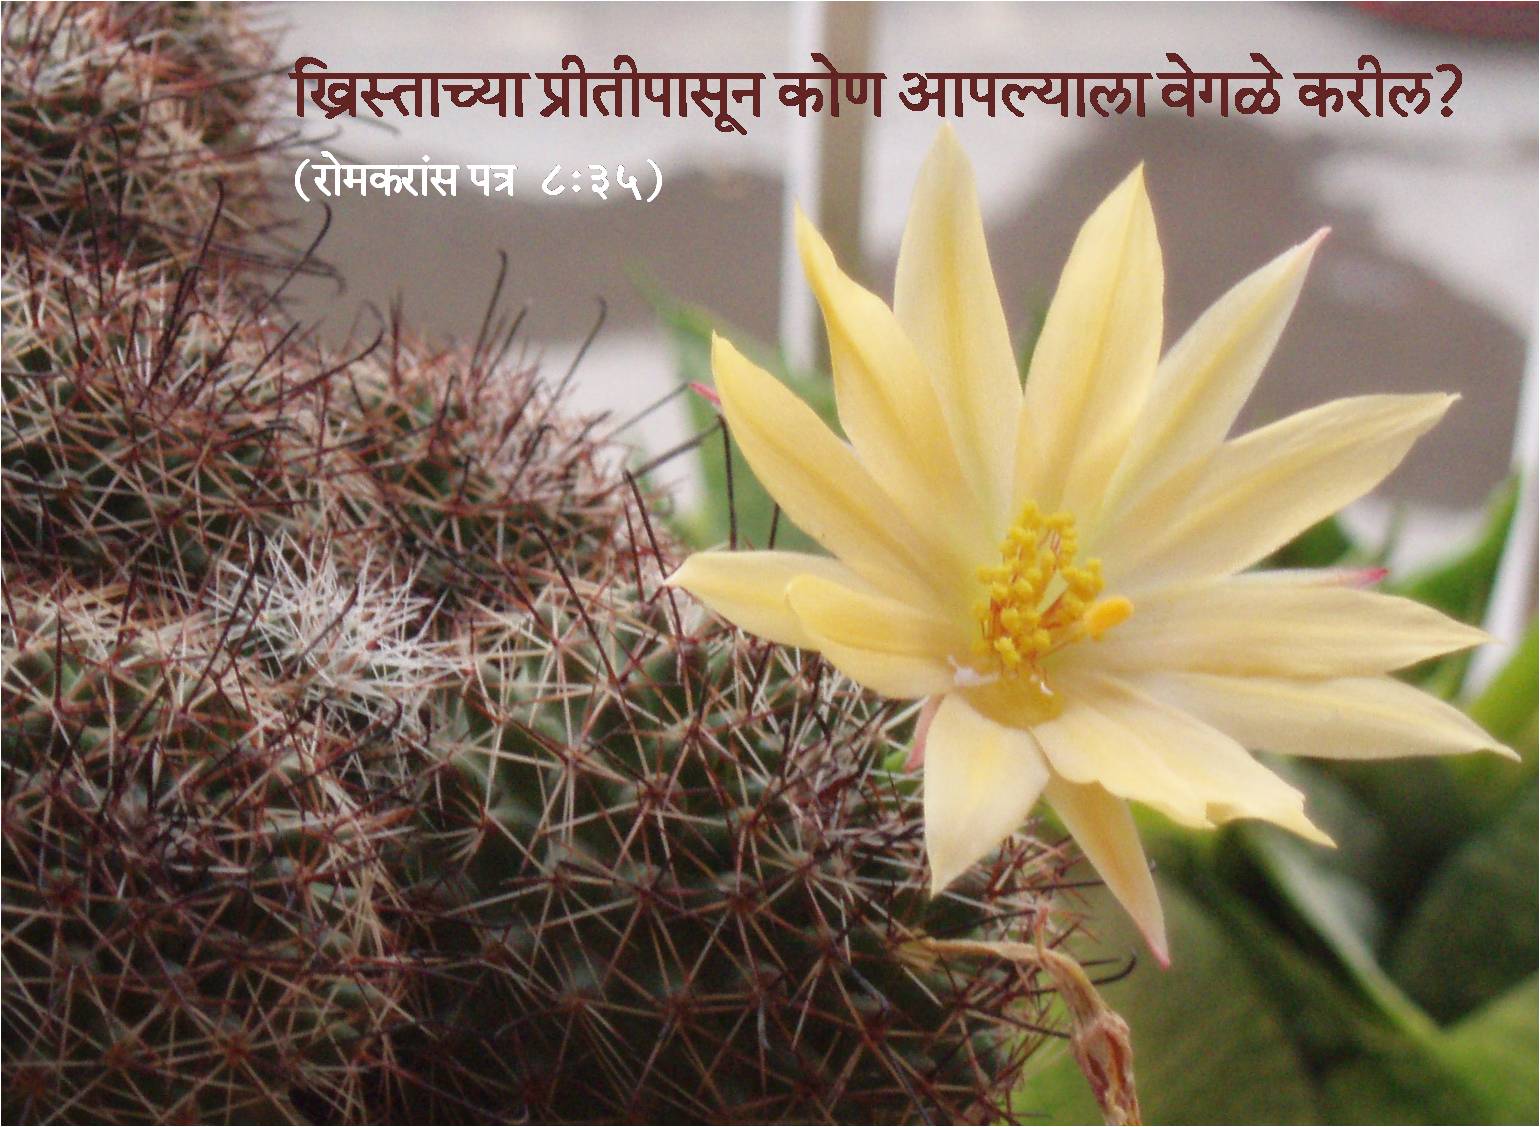 Marathi Bible Wallpapers (17). Posted by Prof R R Kelkar on May 24, 2009